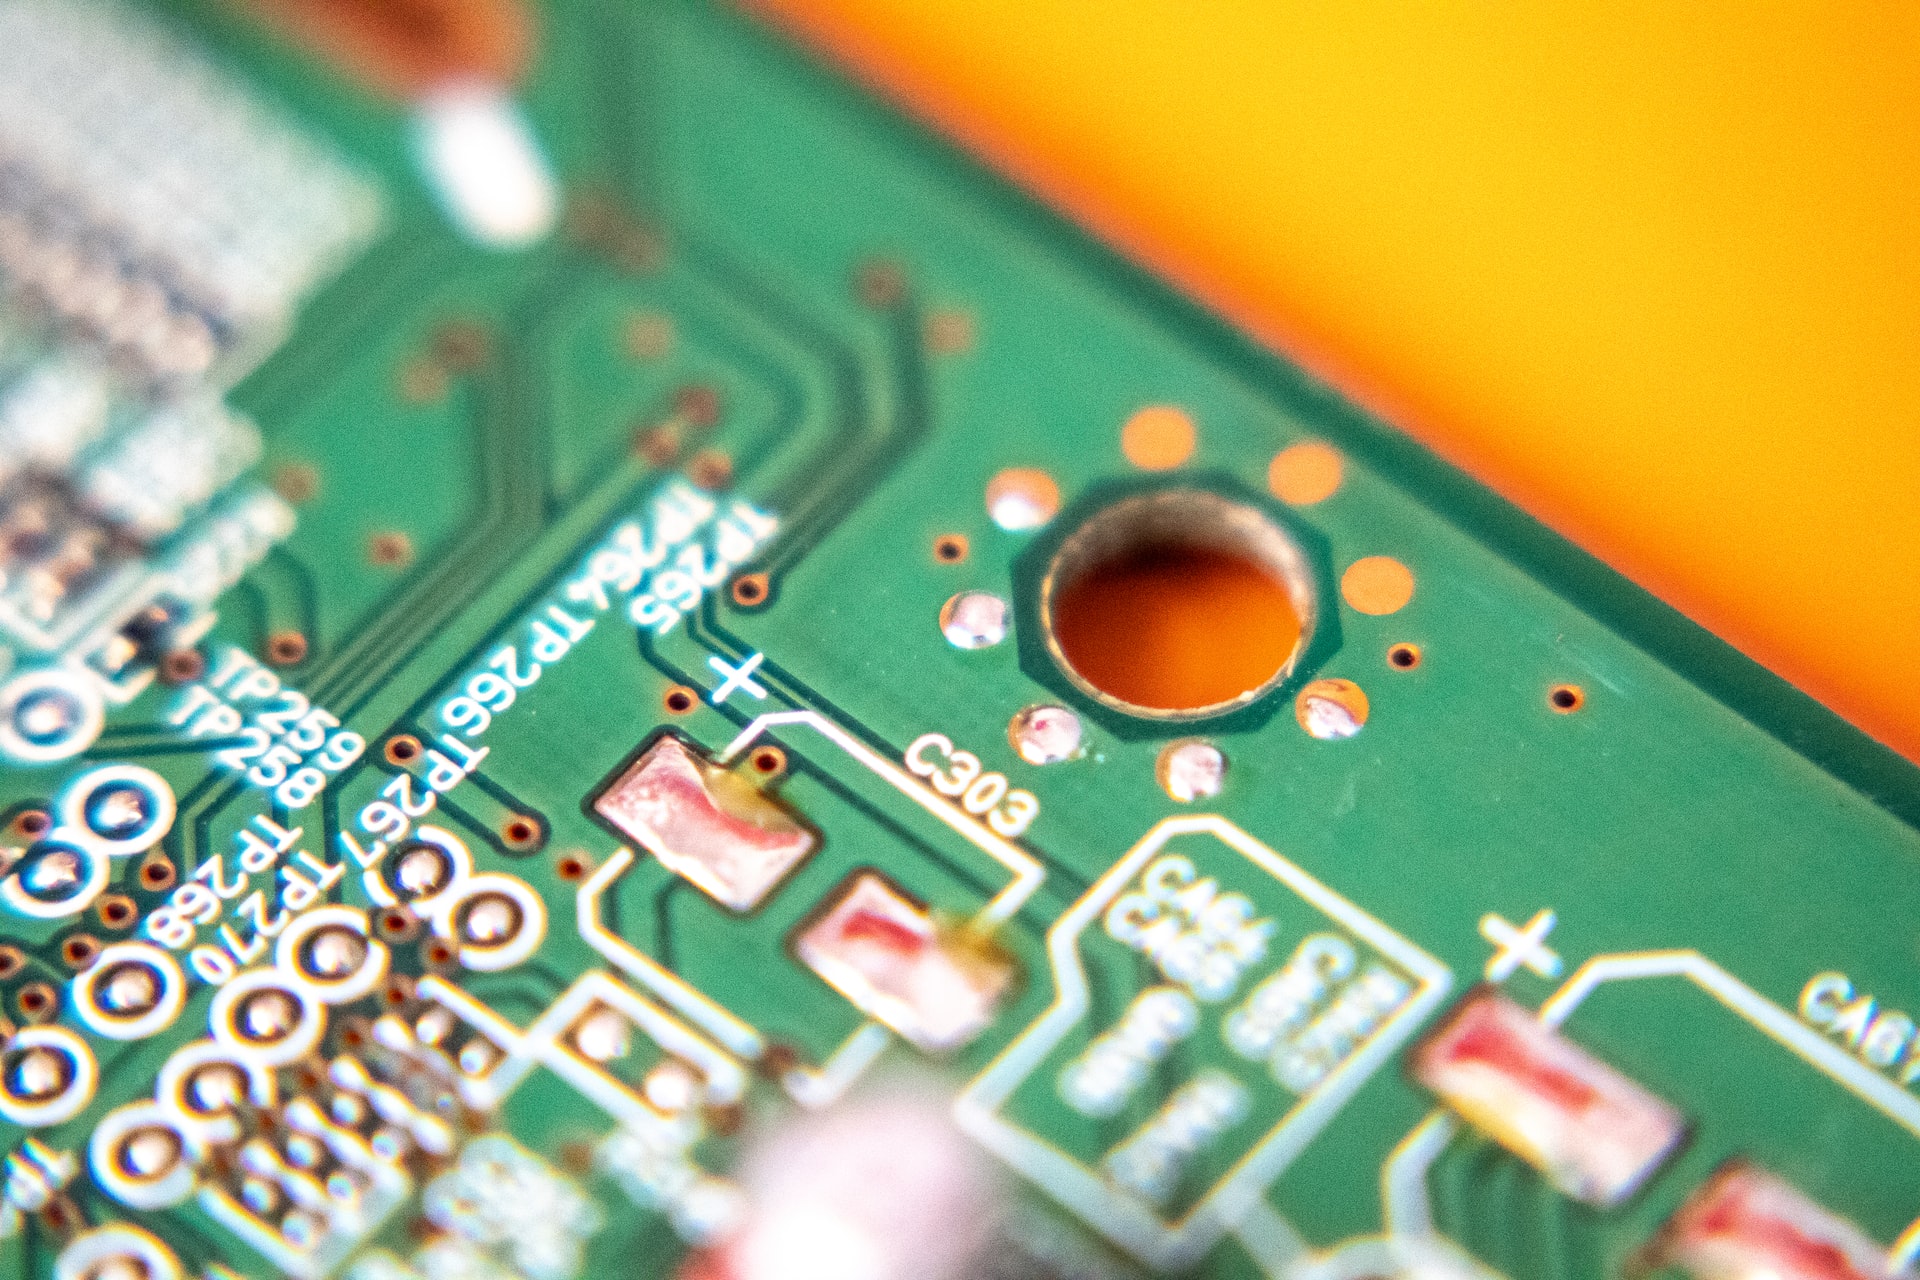 PCB Manufacturing Trends Header Image